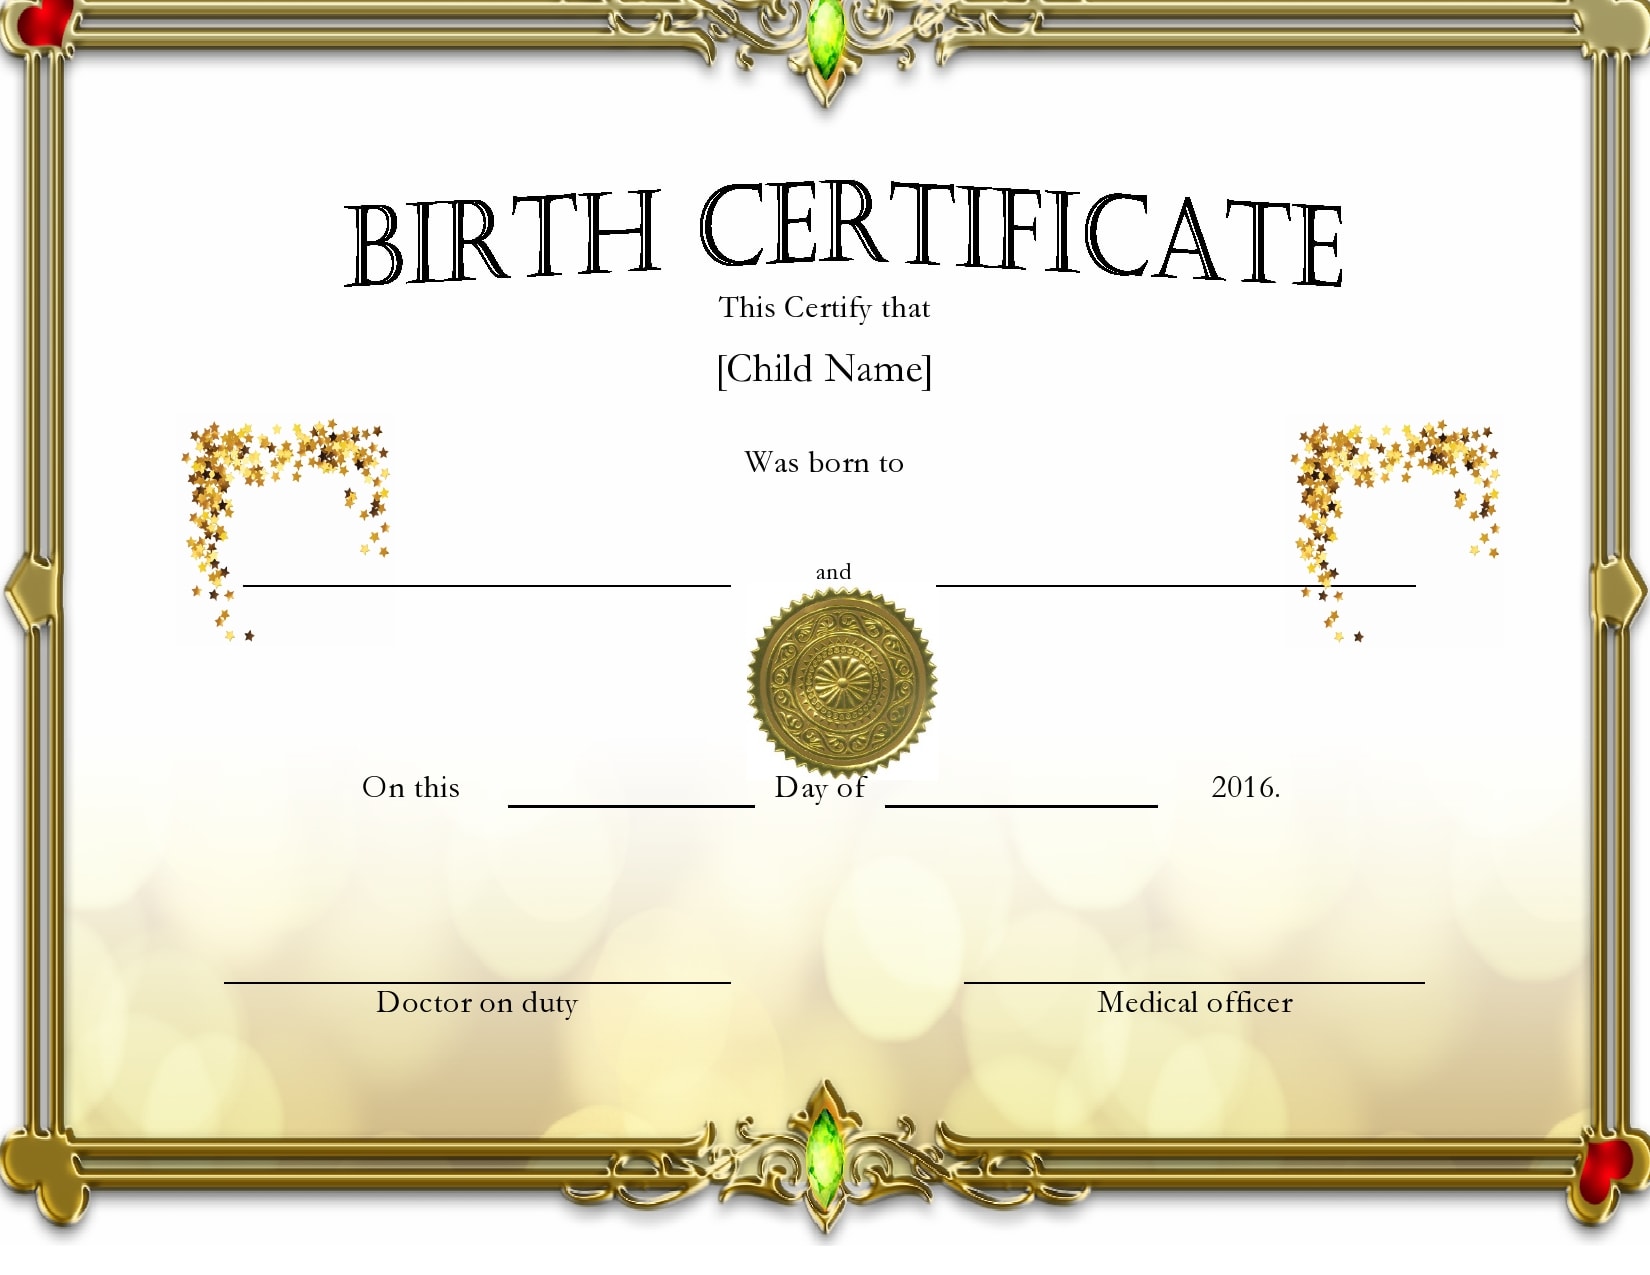 24 Blank Birth Certificate Templates (& Examples) - PrintableTemplates Regarding Official Birth Certificate Template